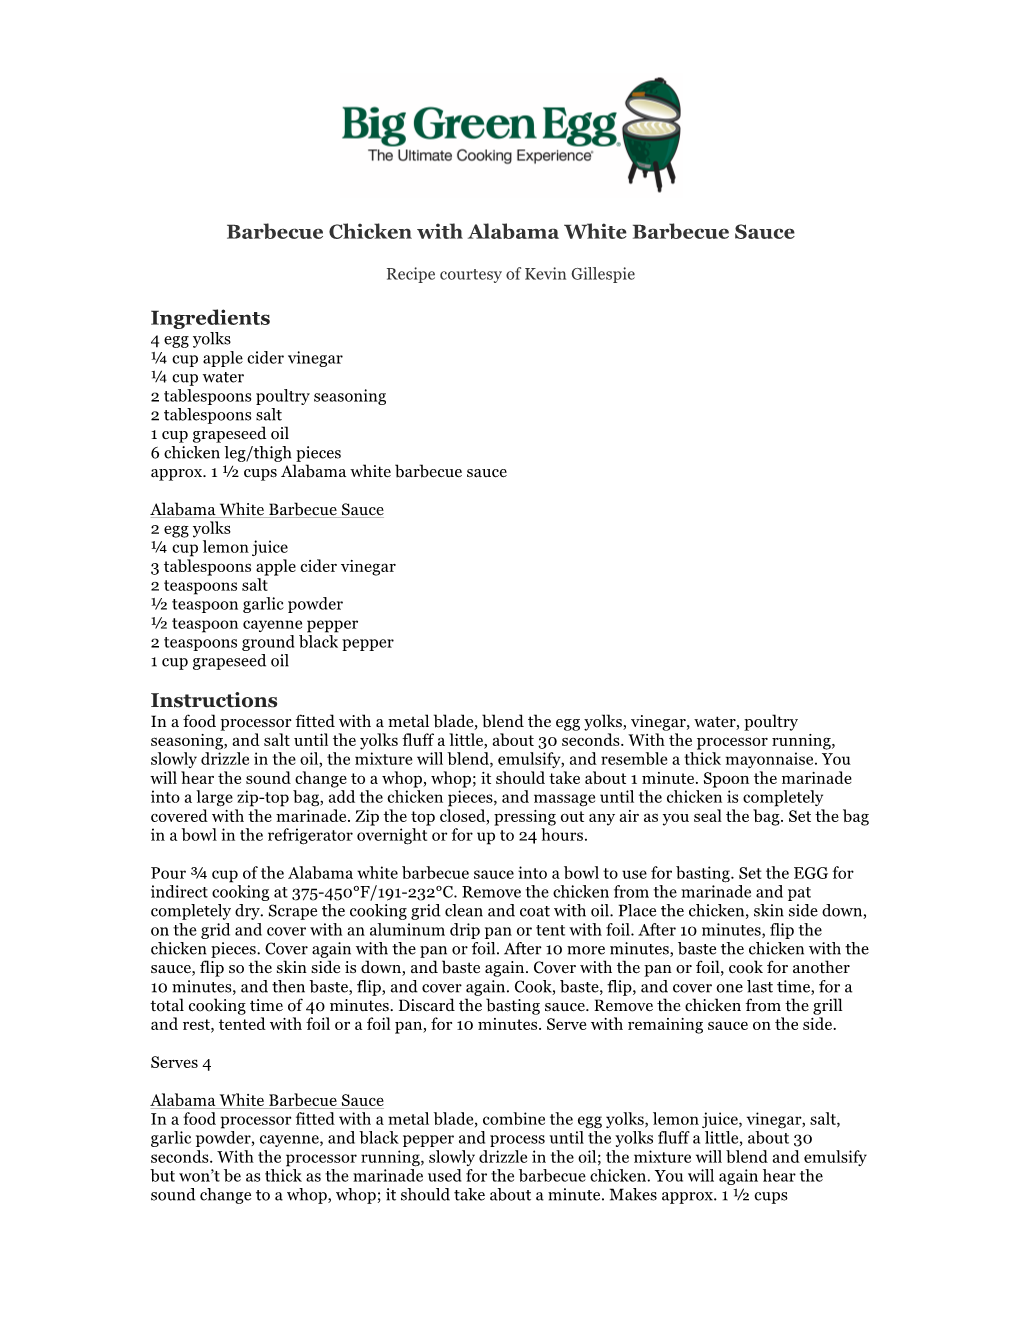 Barbecue Chicken with Alabama White Barbecue Sauce Ingredients Instructions